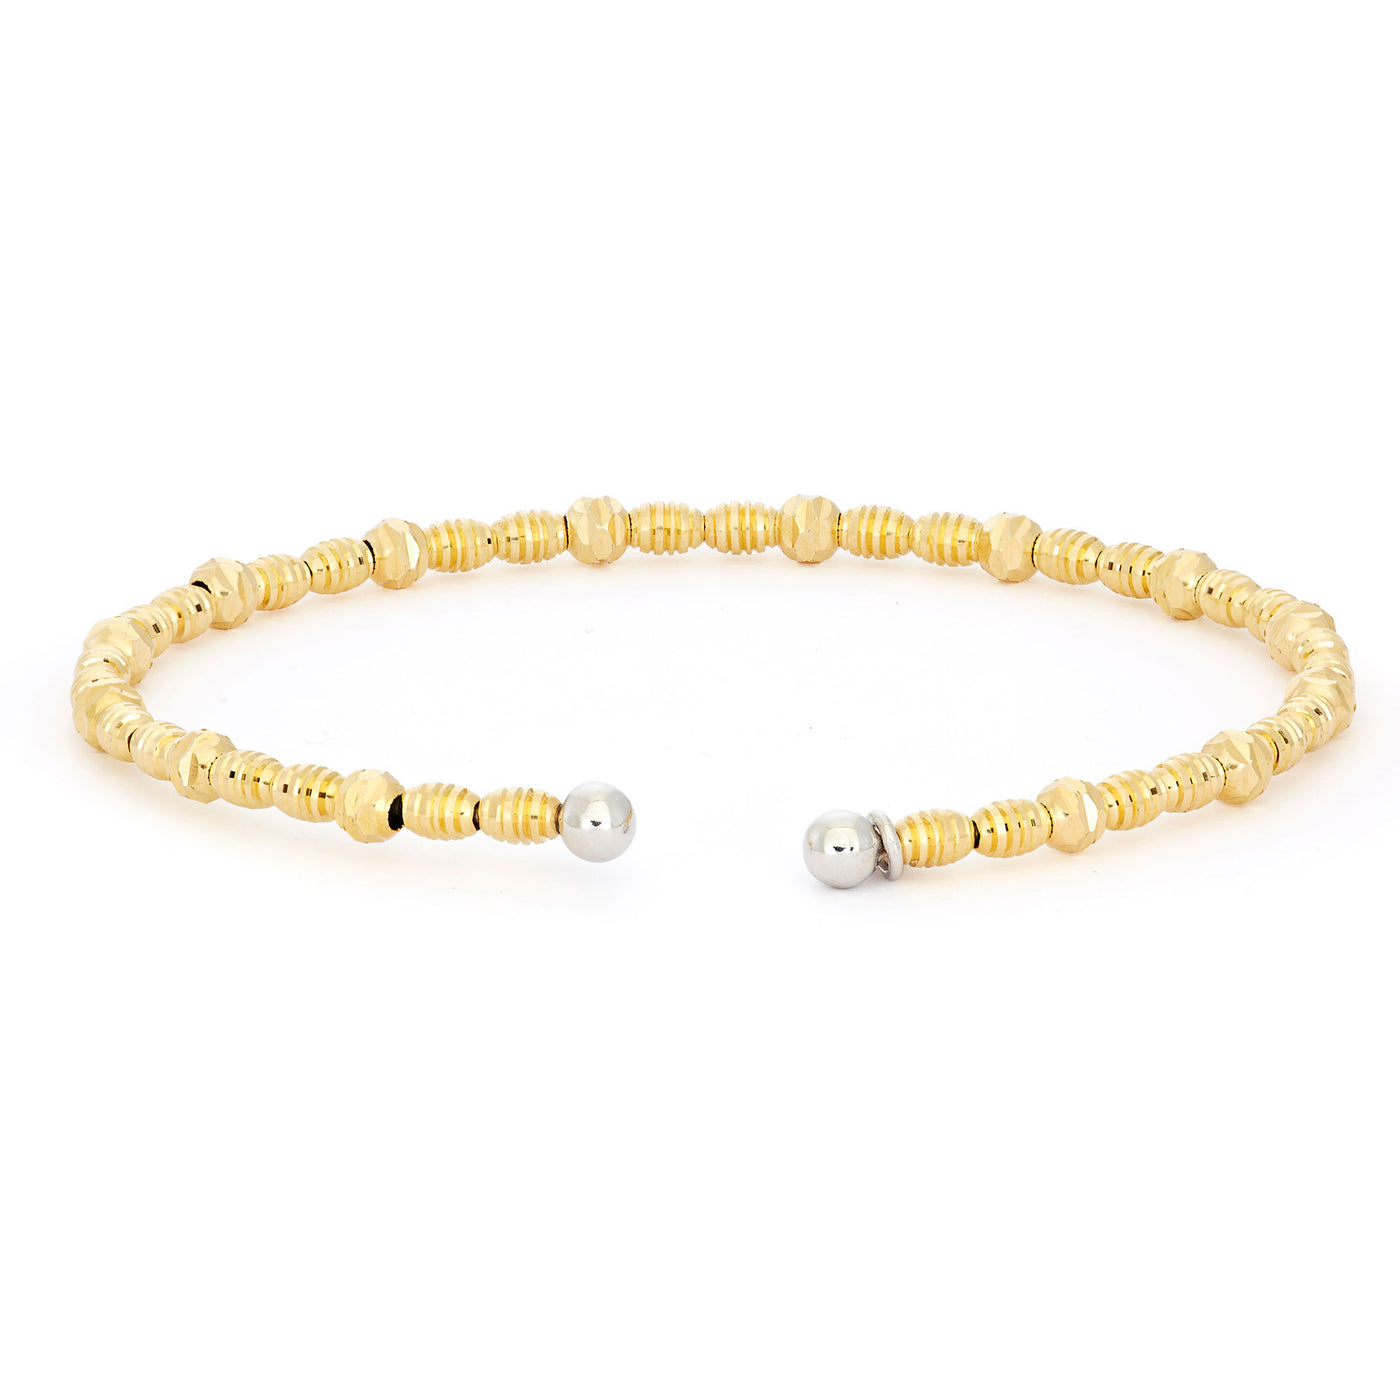 Rebecca Sloane Two-Tone Silver Bangle with Oval and Round Beads